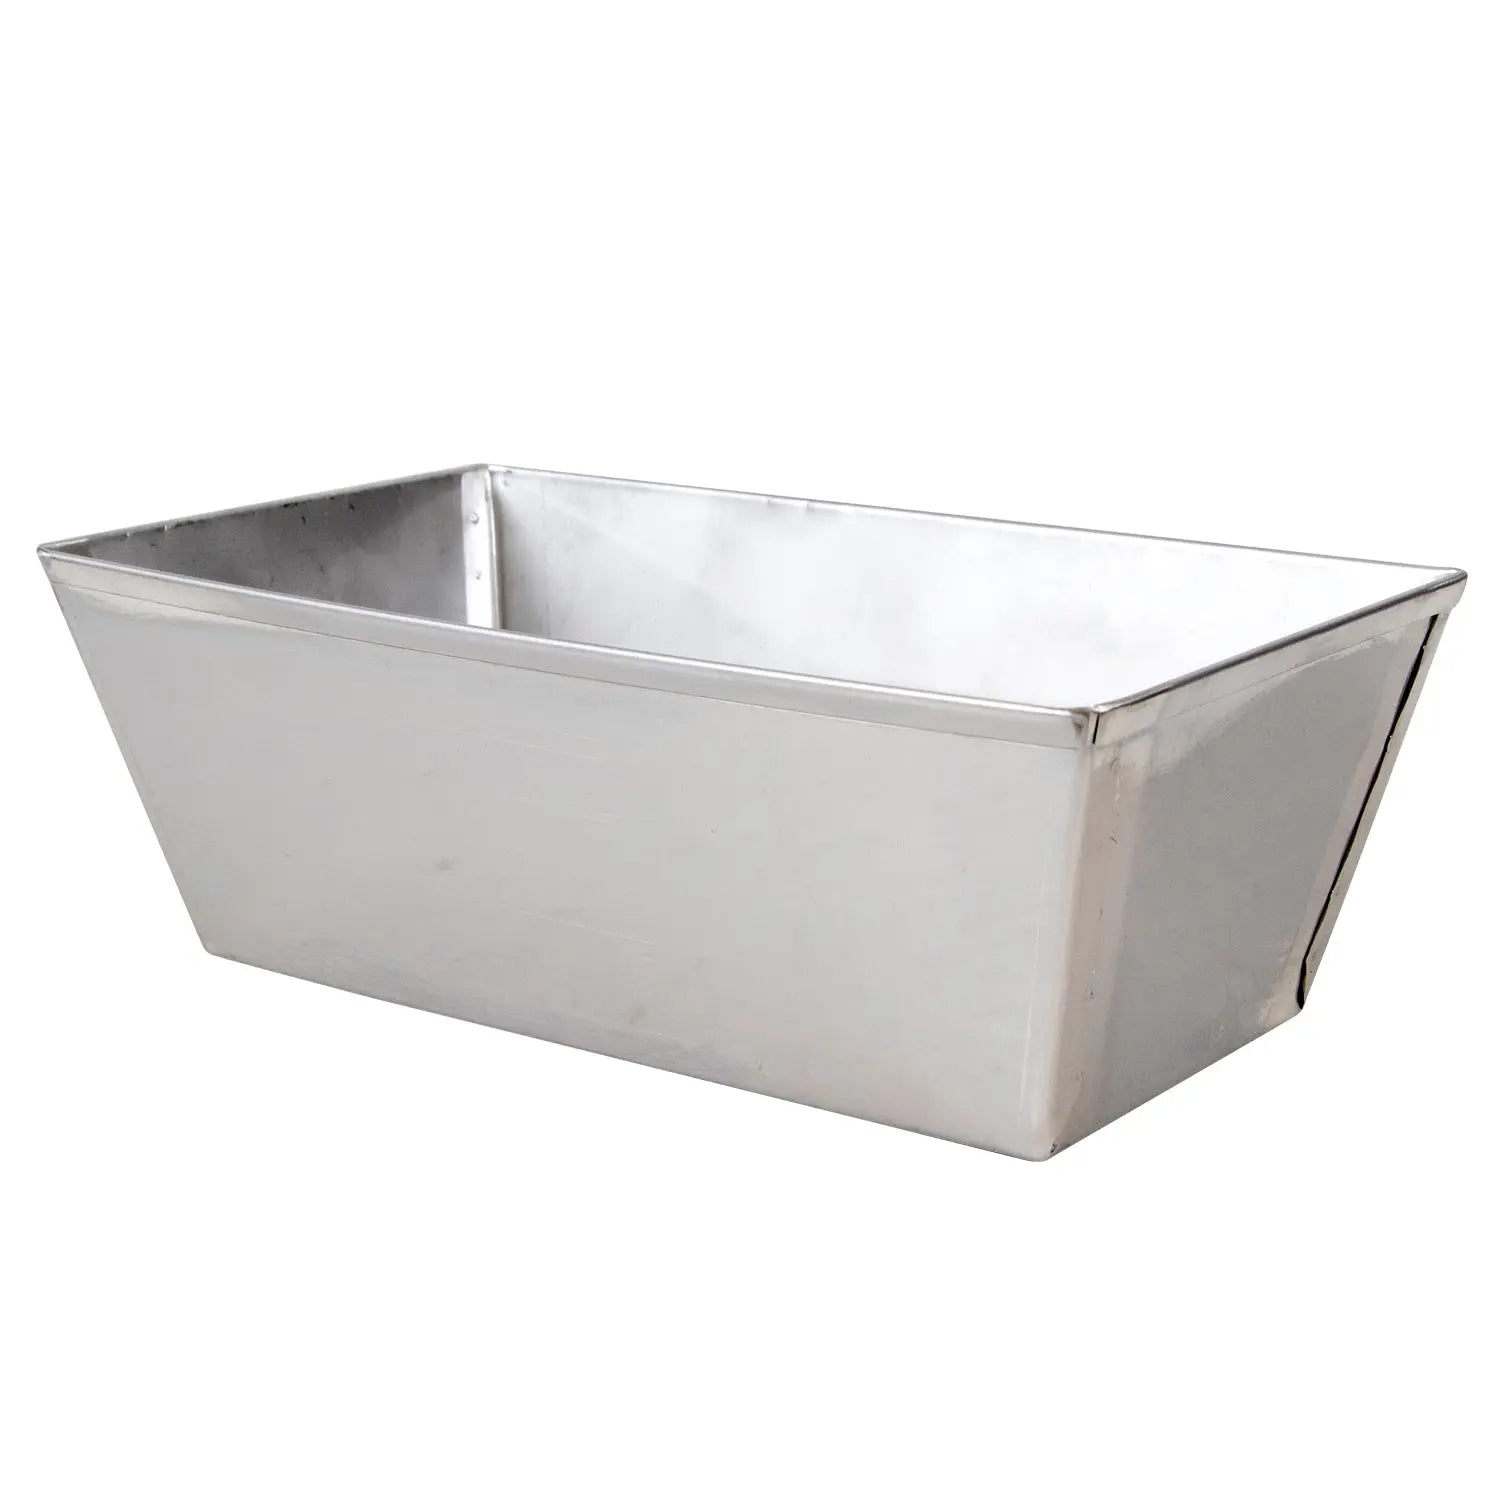 Hickoryware - Bread Pan Large 8 x 4.5 Stainless Steel - Made In